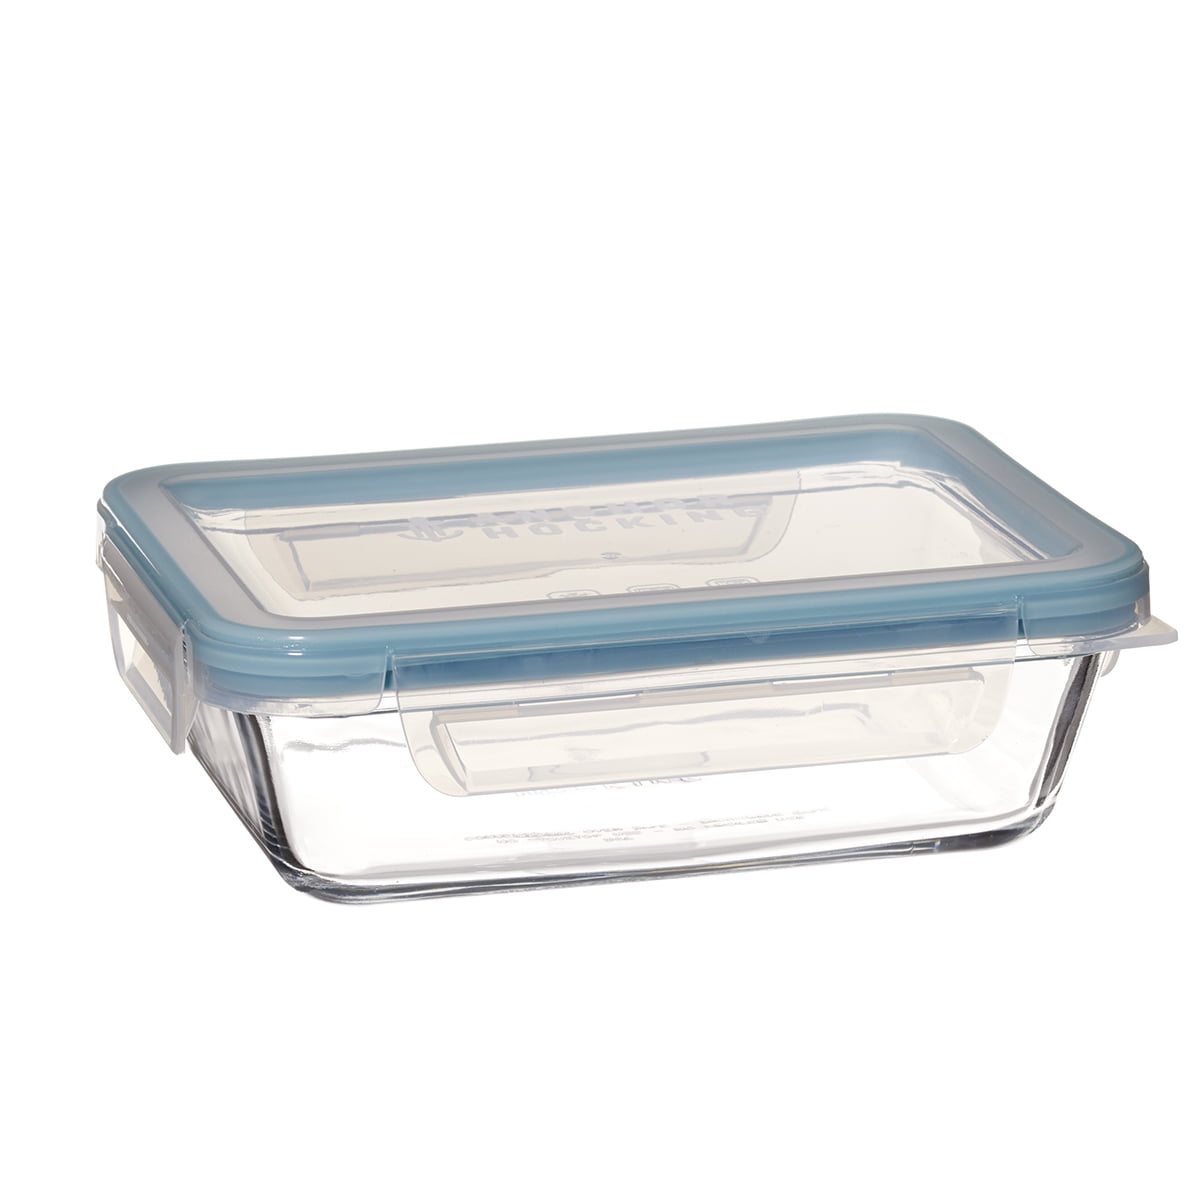 Anchor Hocking Classic Rectangular Glass Food Storage with Navy Lid, 6  Cups, Set of 2